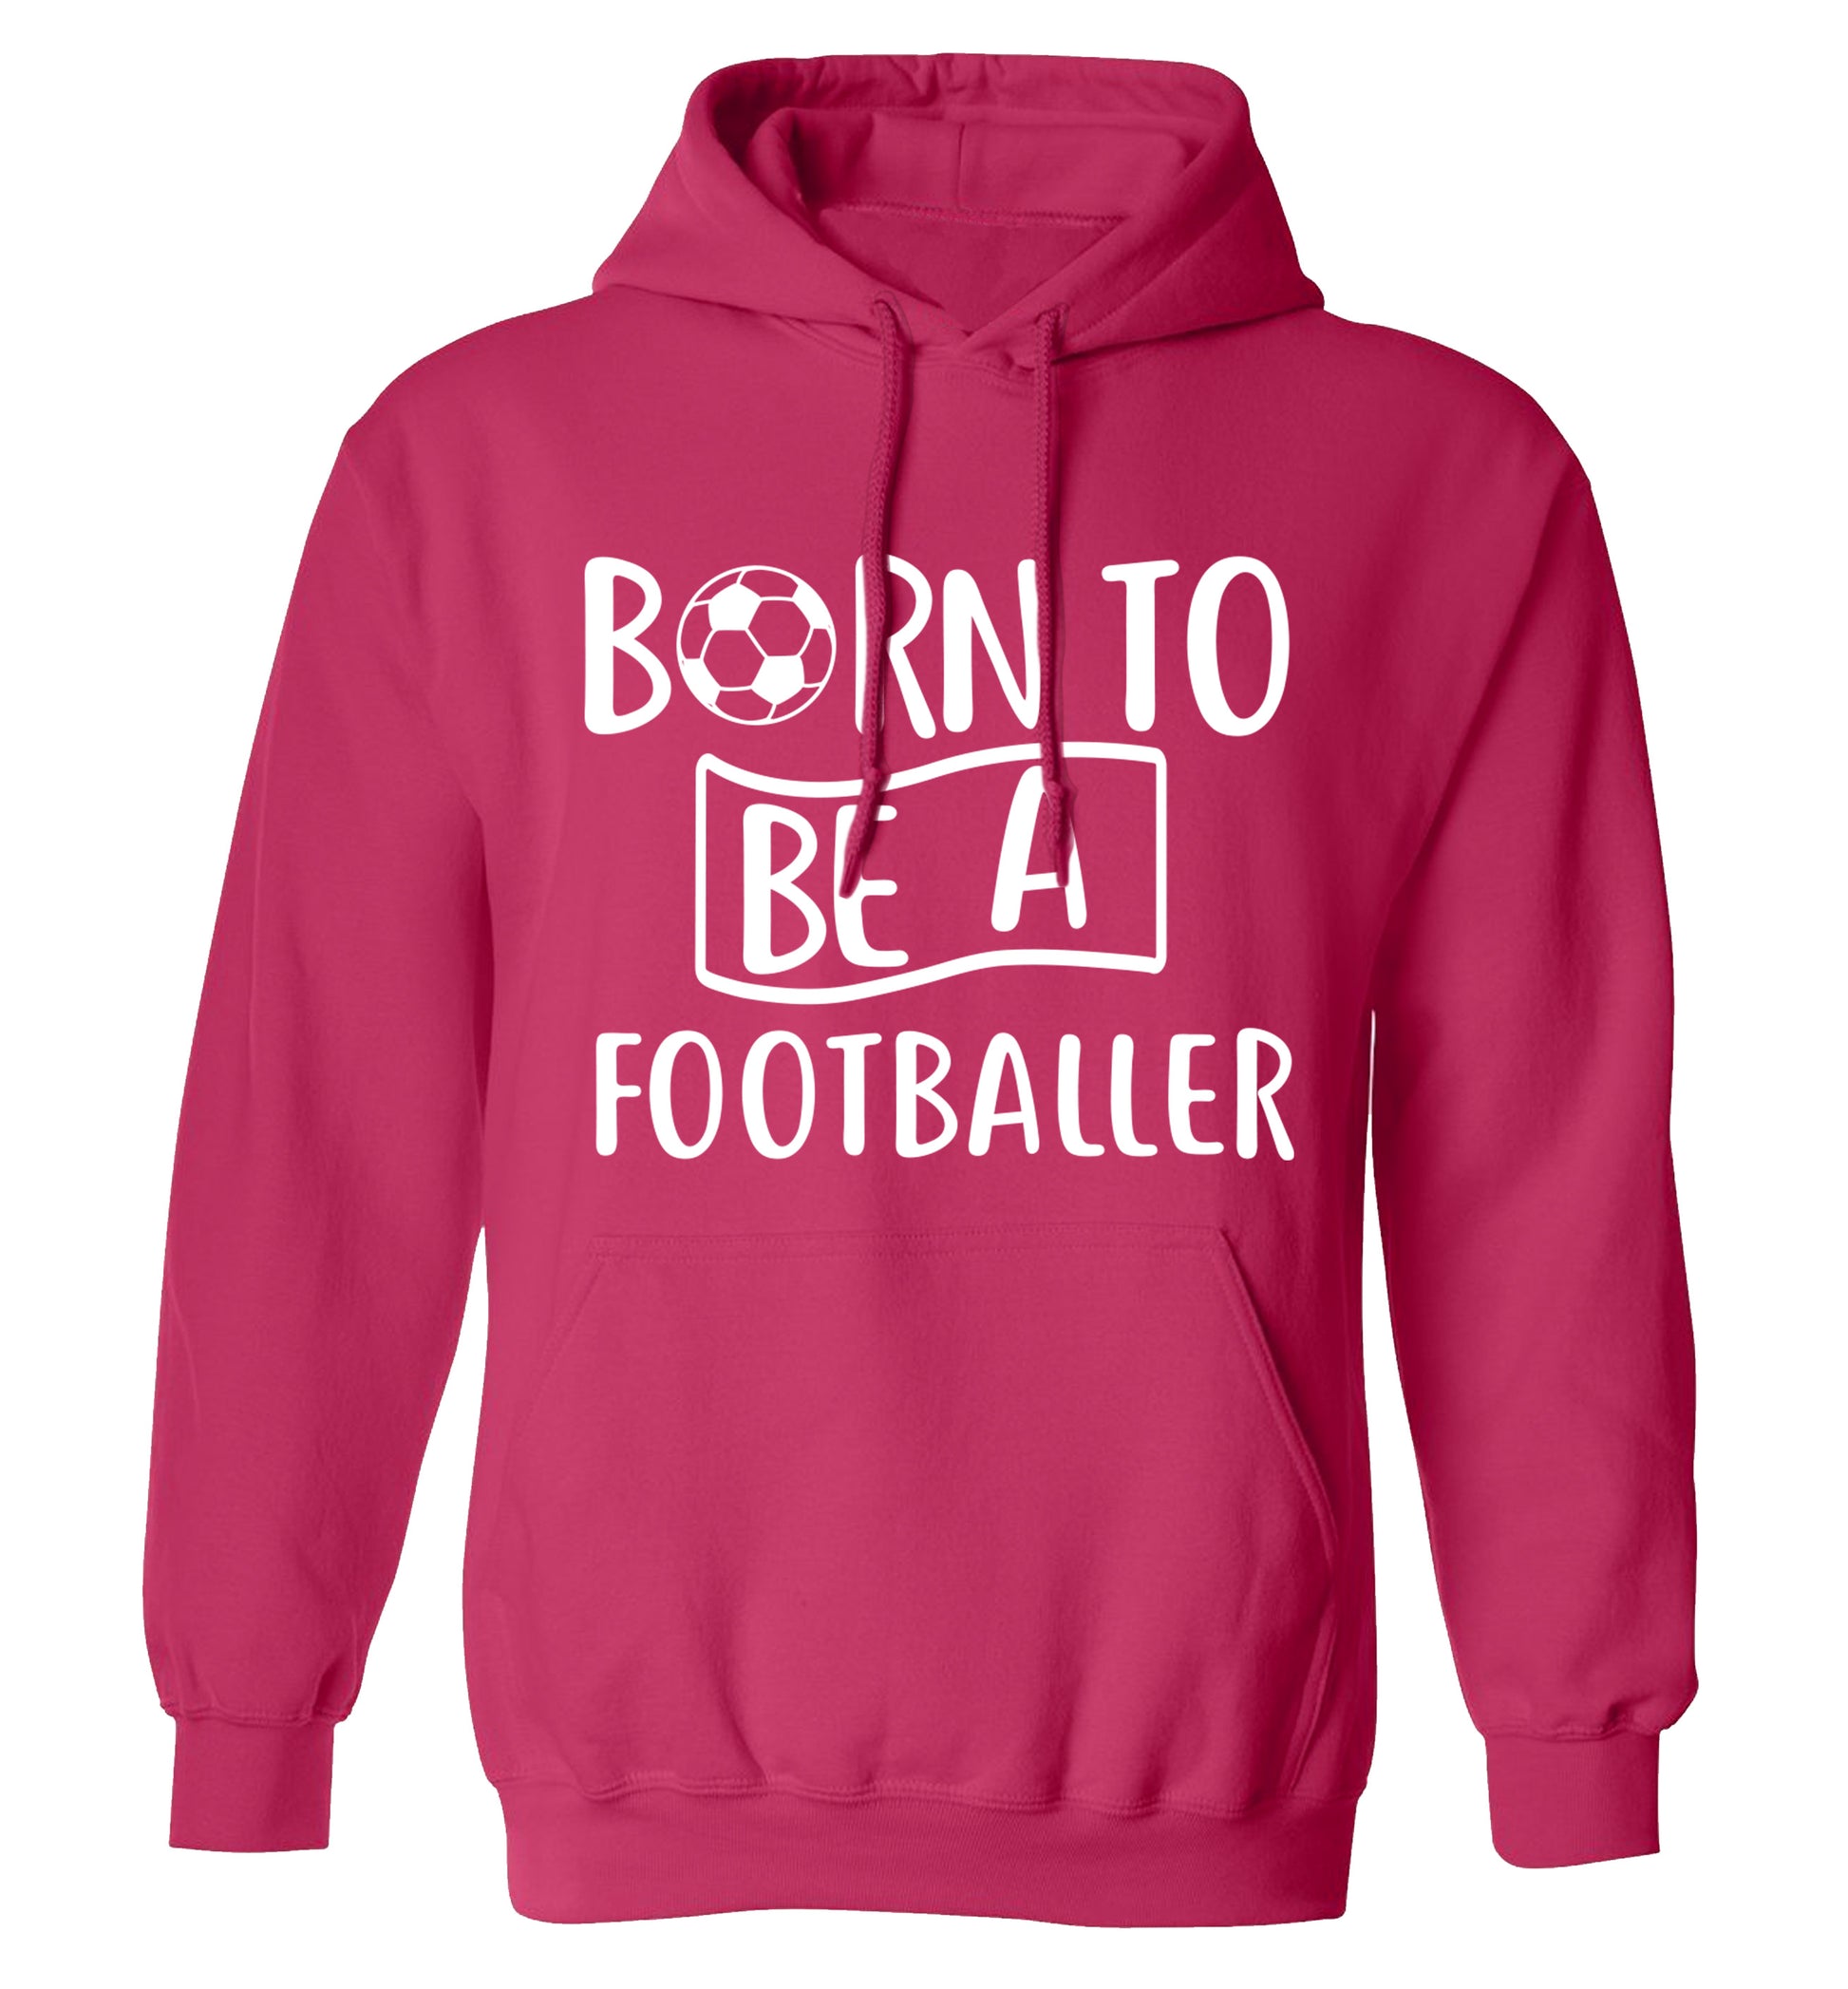 Born to be a footballer adults unisexpink hoodie 2XL